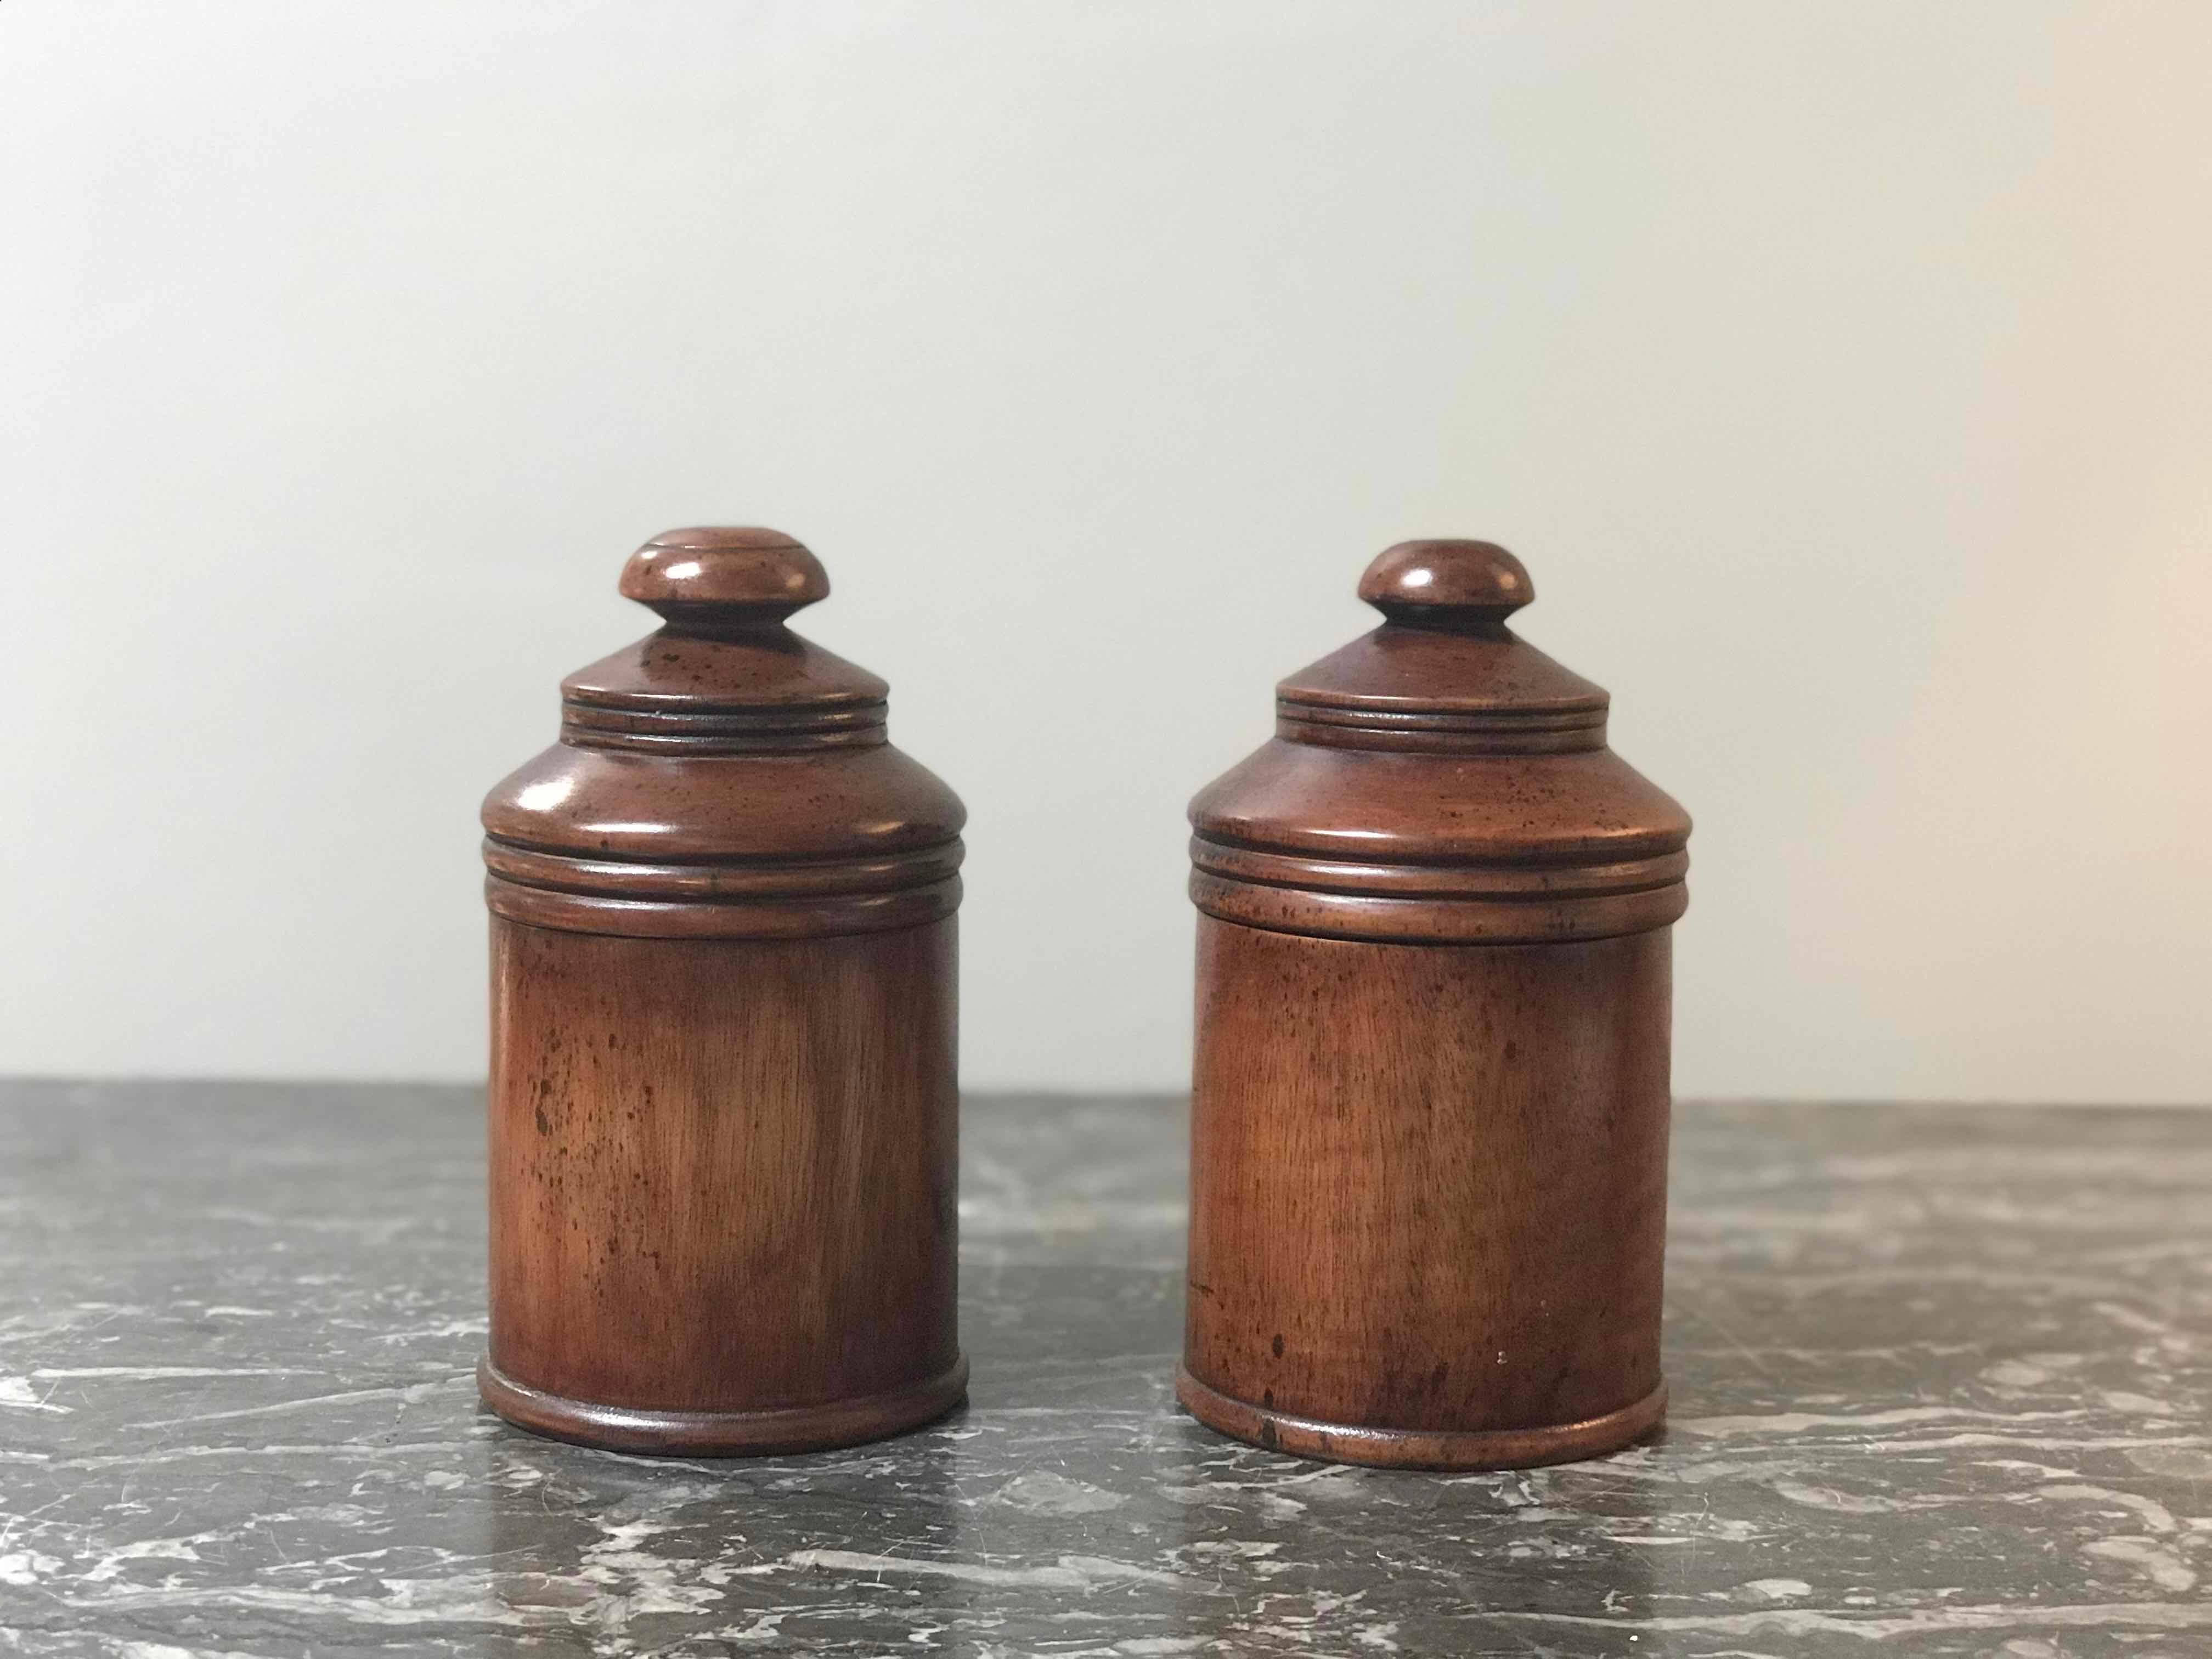 Pair of wooden treen pots with lids from late 19th century England. 